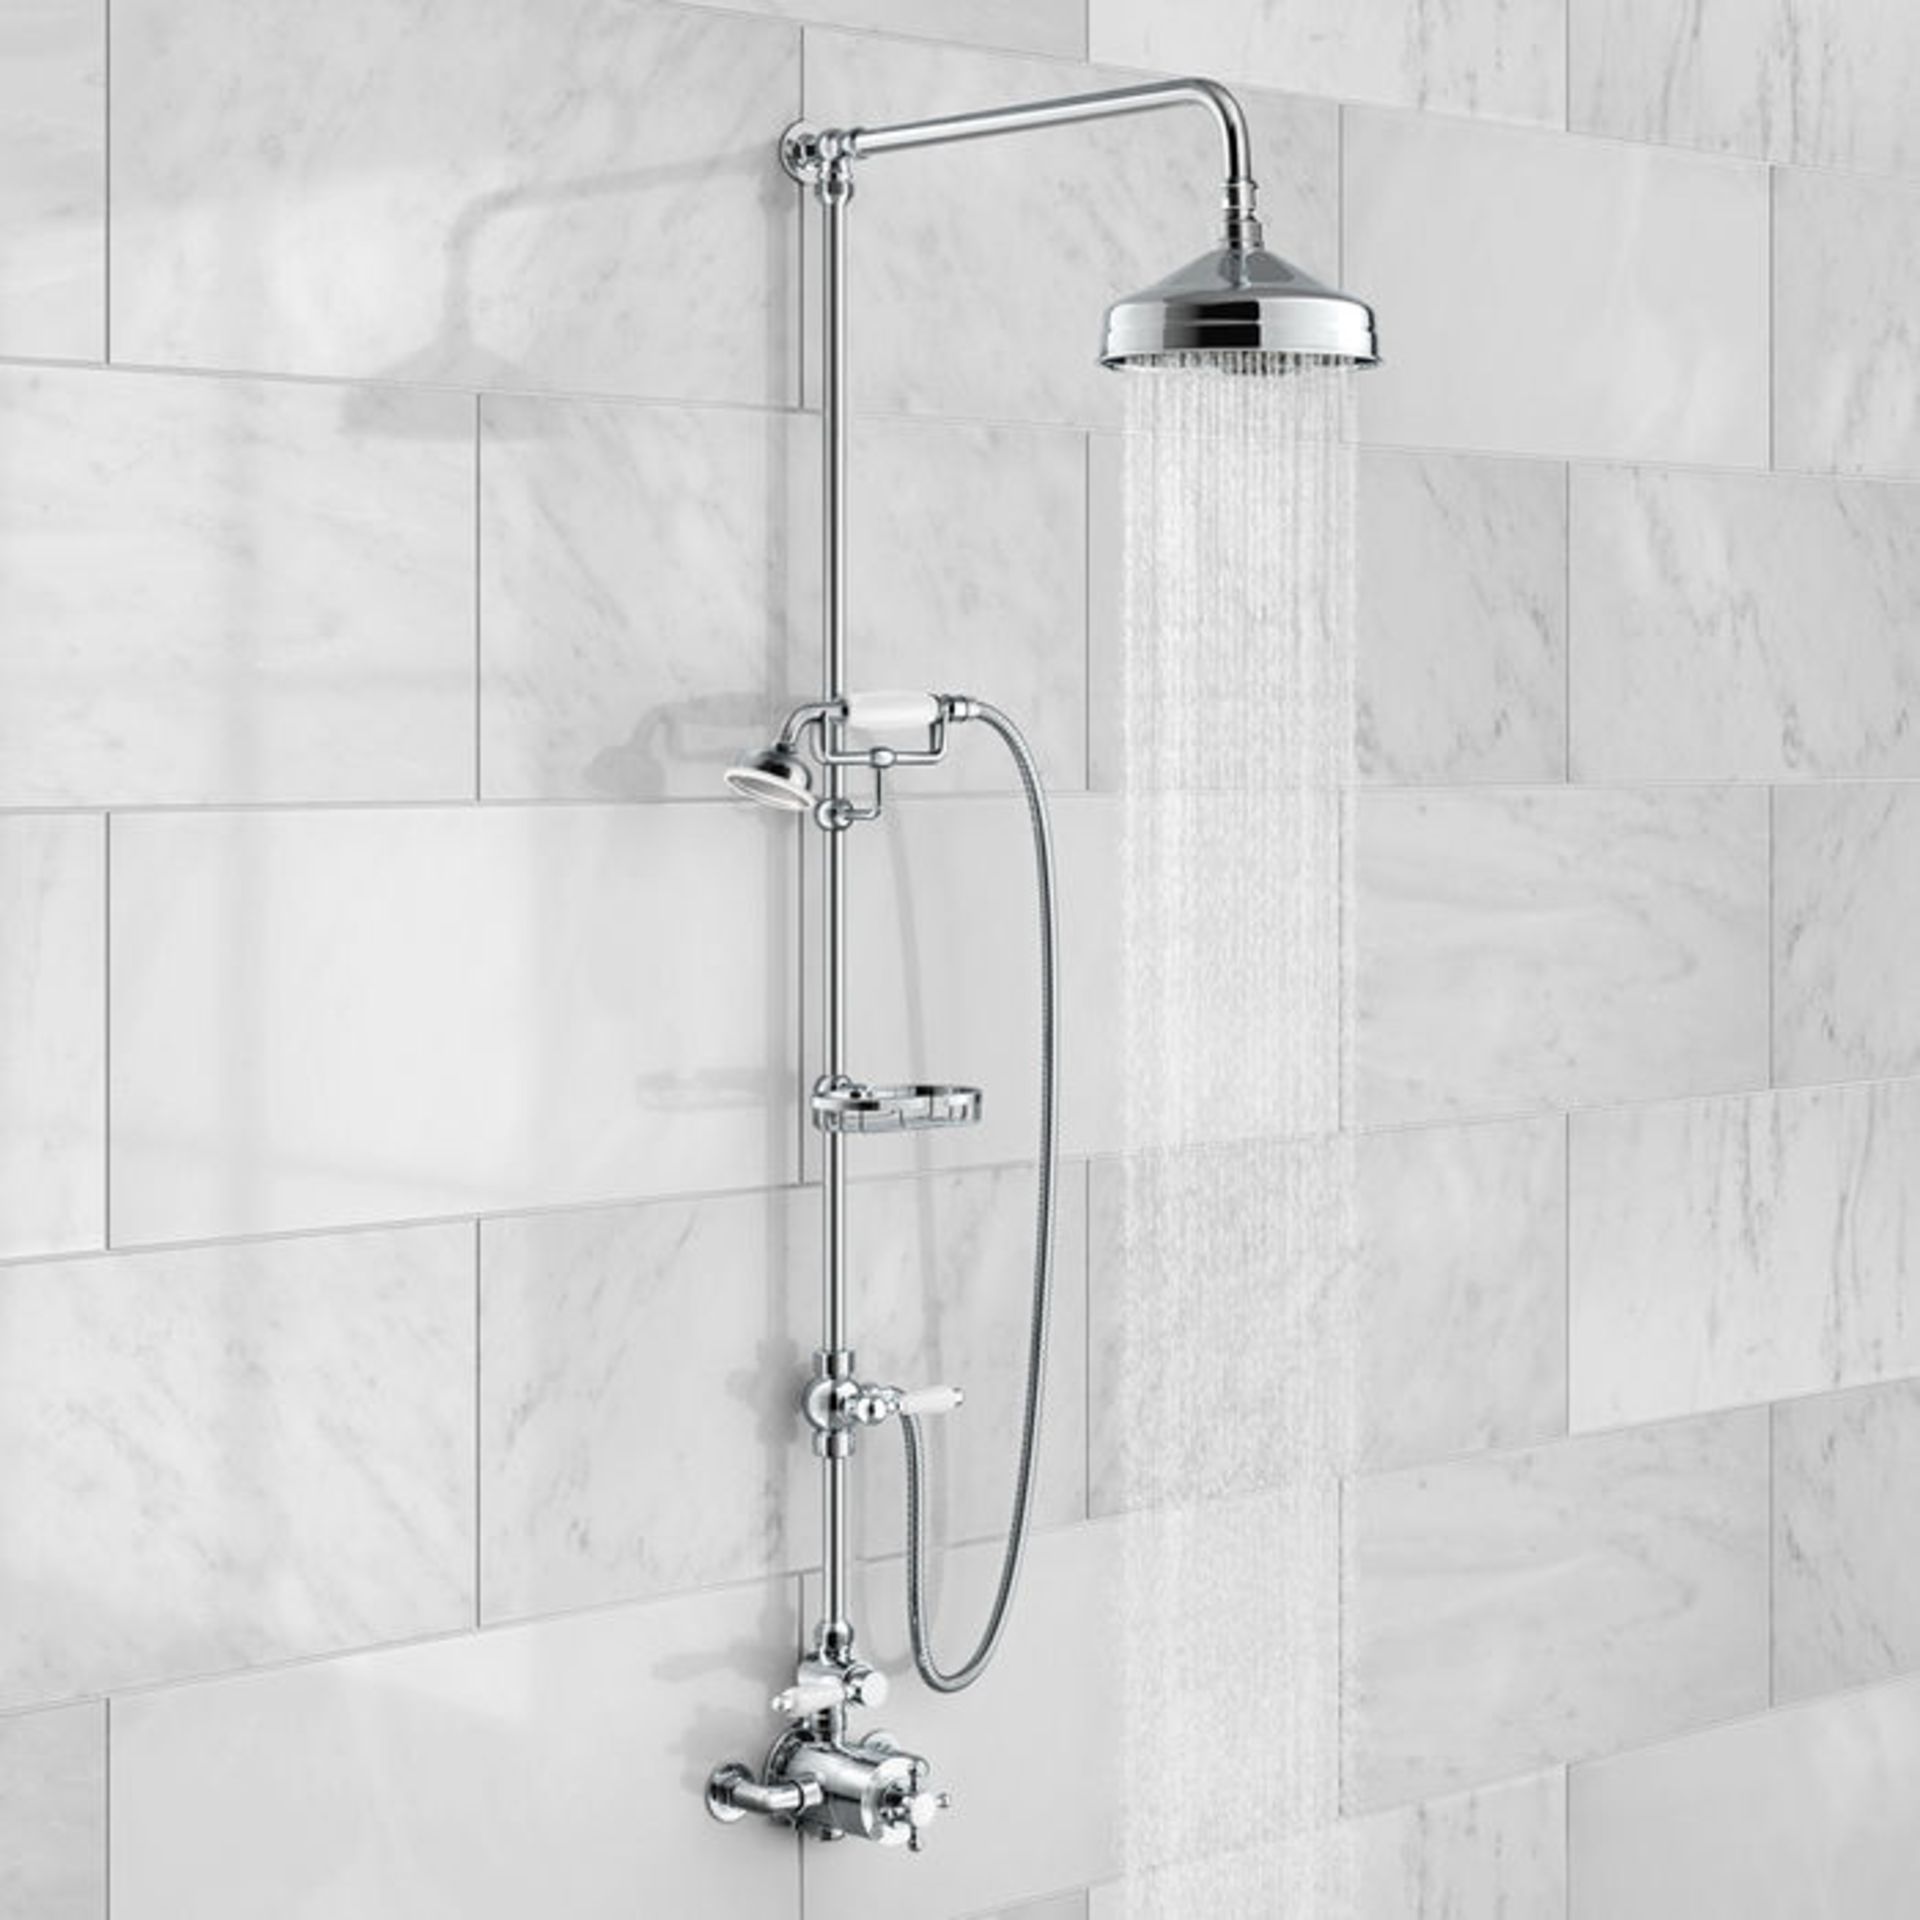 (J213) 200mm Finest Head Traditional Exposed Shower Kit, Handheld & Soap Dish. RRP £599.99. We